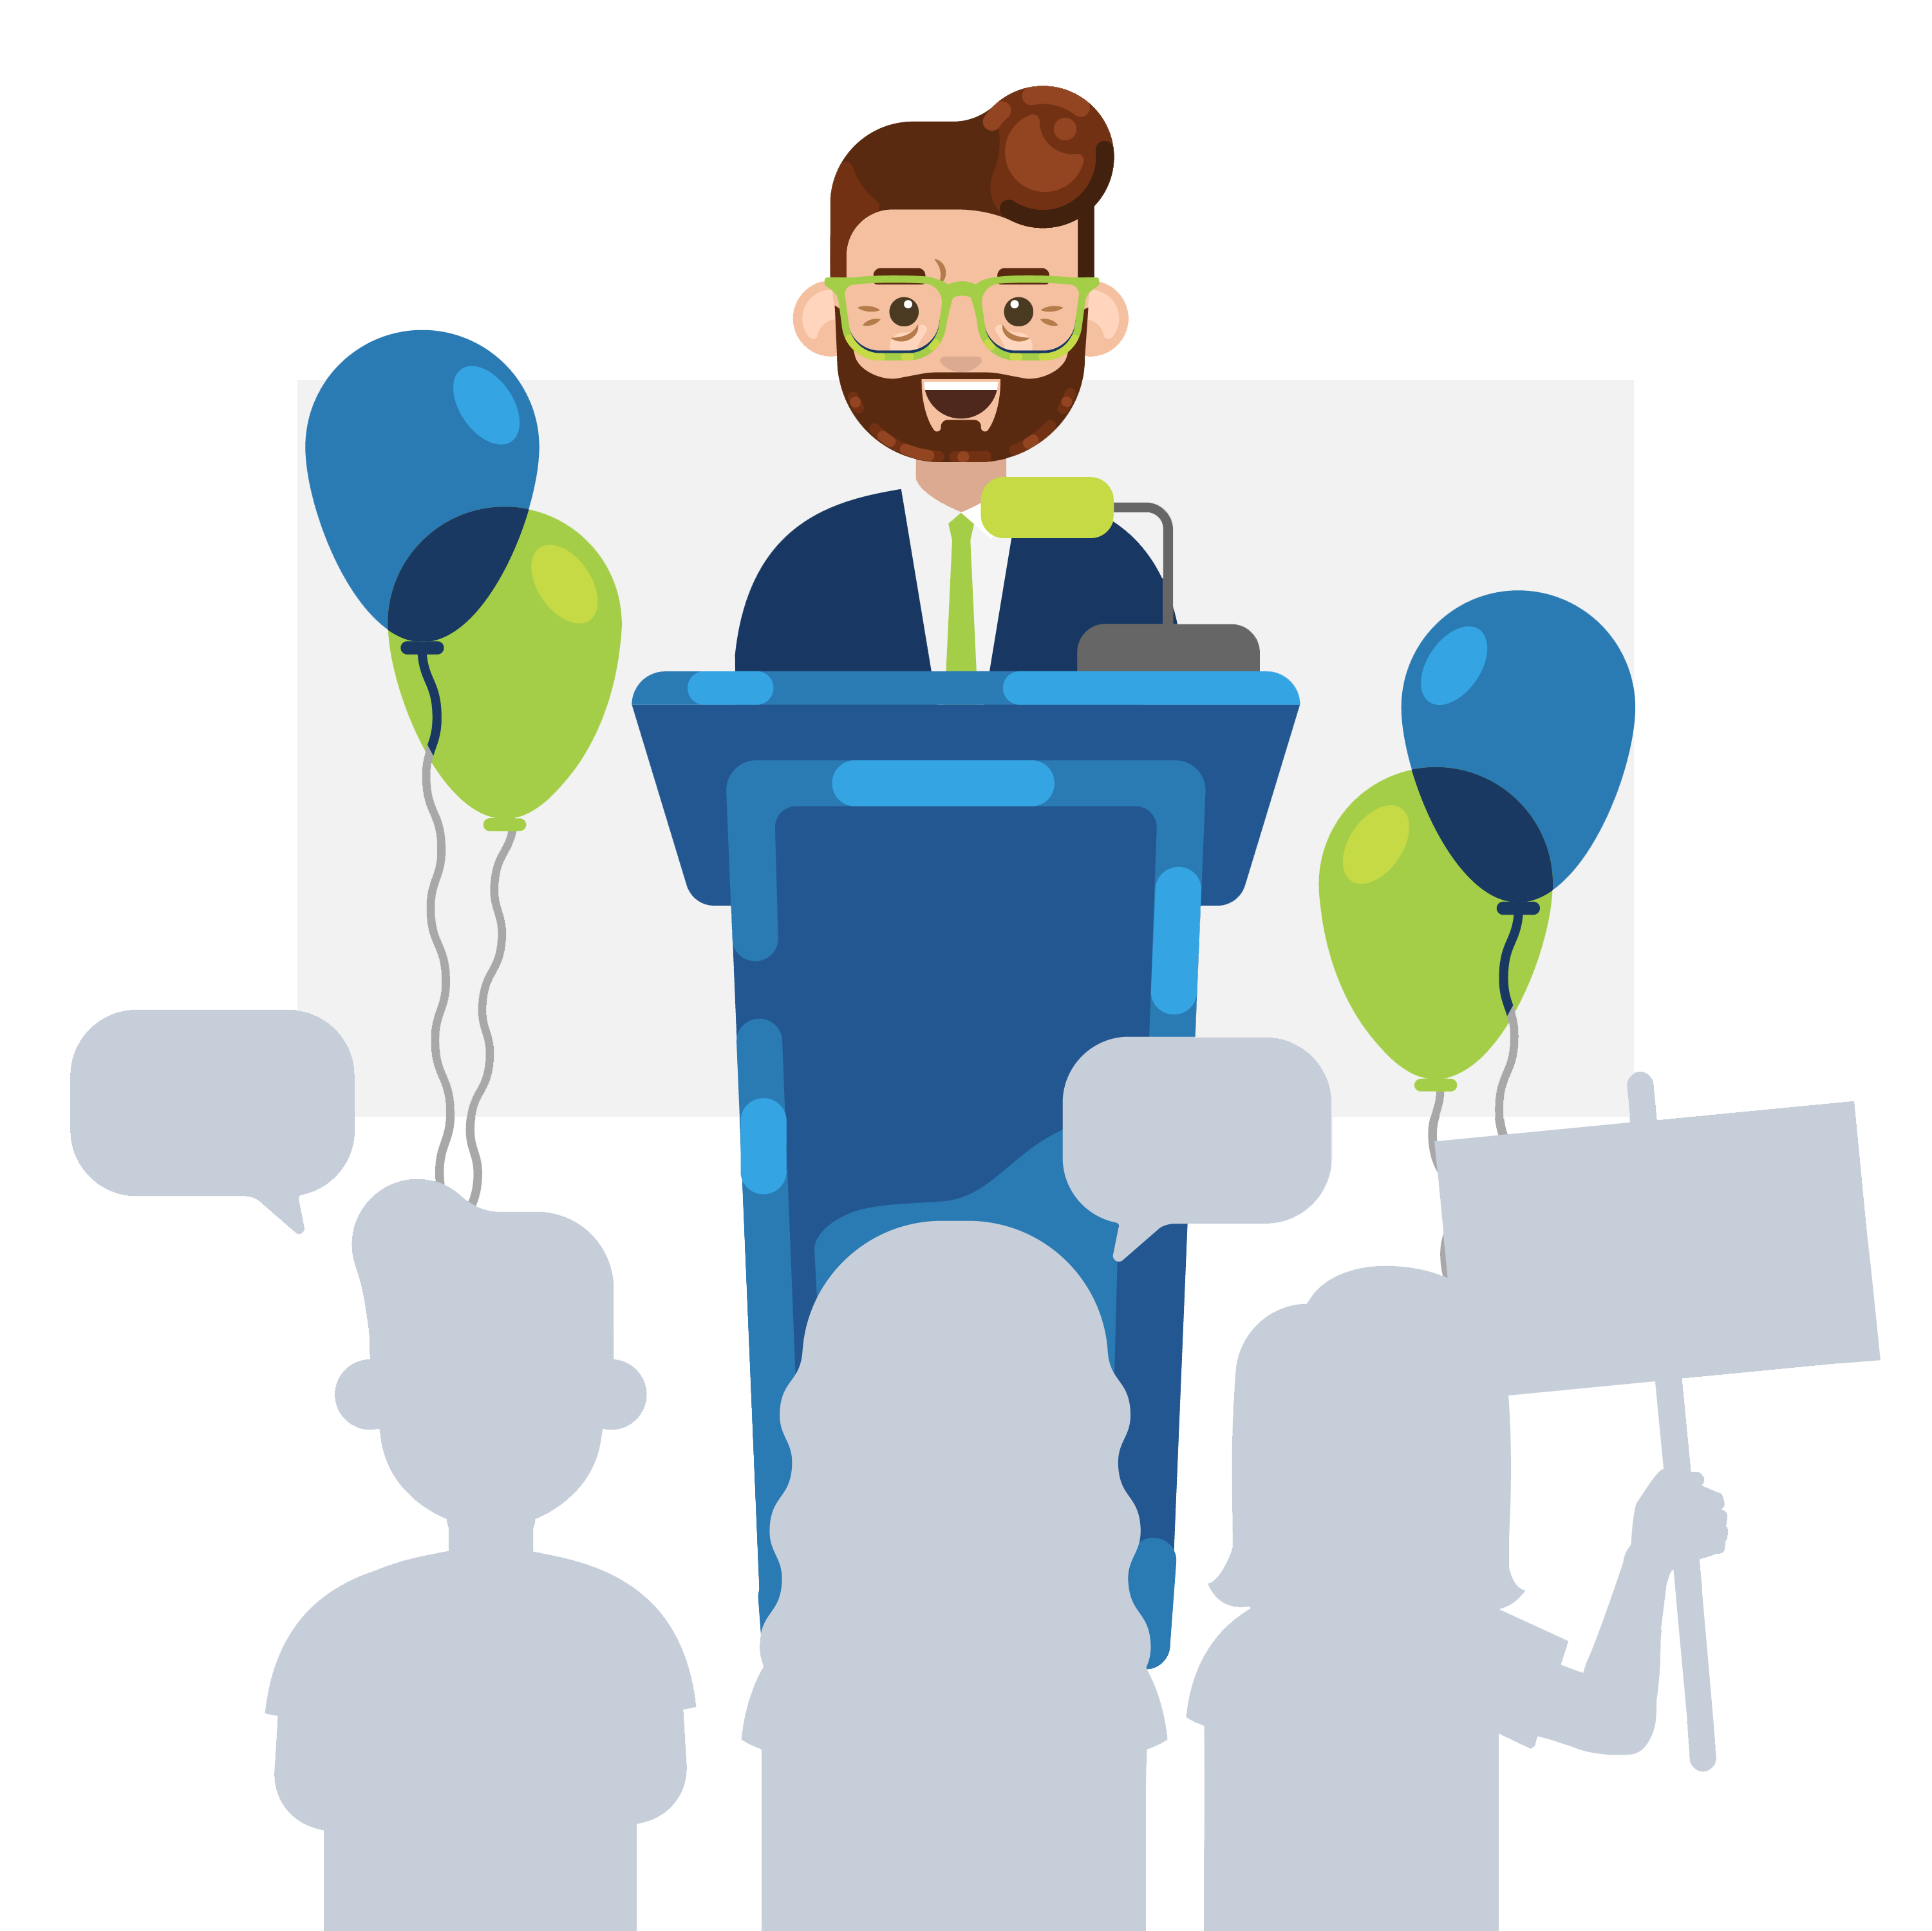 Man standing at a podium with balloons and an audience in front of him